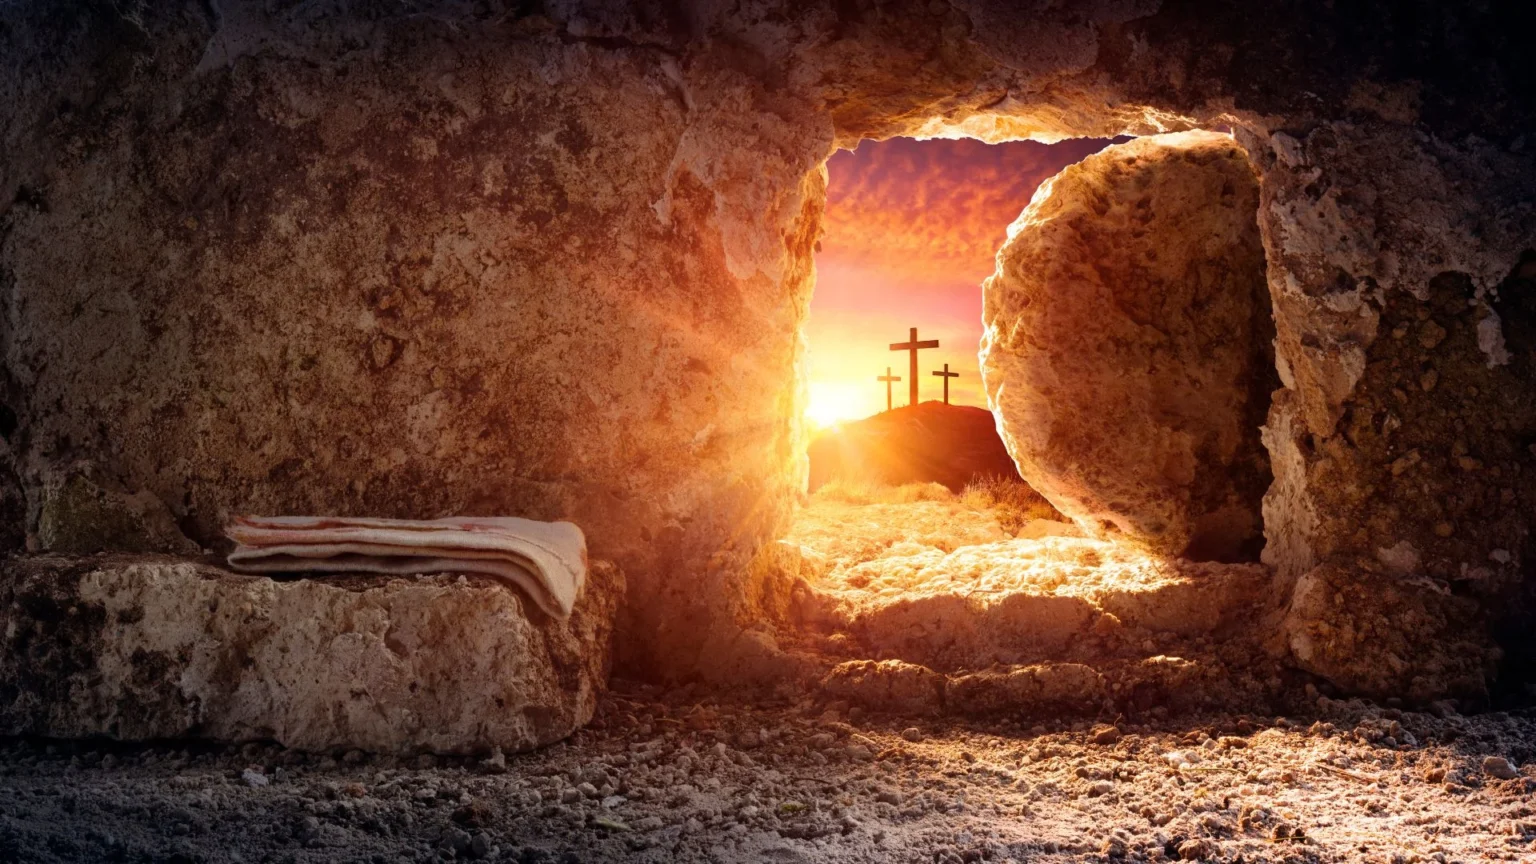 how big was the stone in front of jesus tomb ,how did they seal jesus tomb ,how heavy was the stone at jesus tomb , how heavy was the stone in front of jesus tomb , how heavy was the stone that covered jesus tomb , how large was the stone at jesus tomb , how much did the stone at jesus tomb weigh ,how much did the stone weigh at jesus tomb , how was jesus tomb sealed ,how was the tomb of jesus sealed